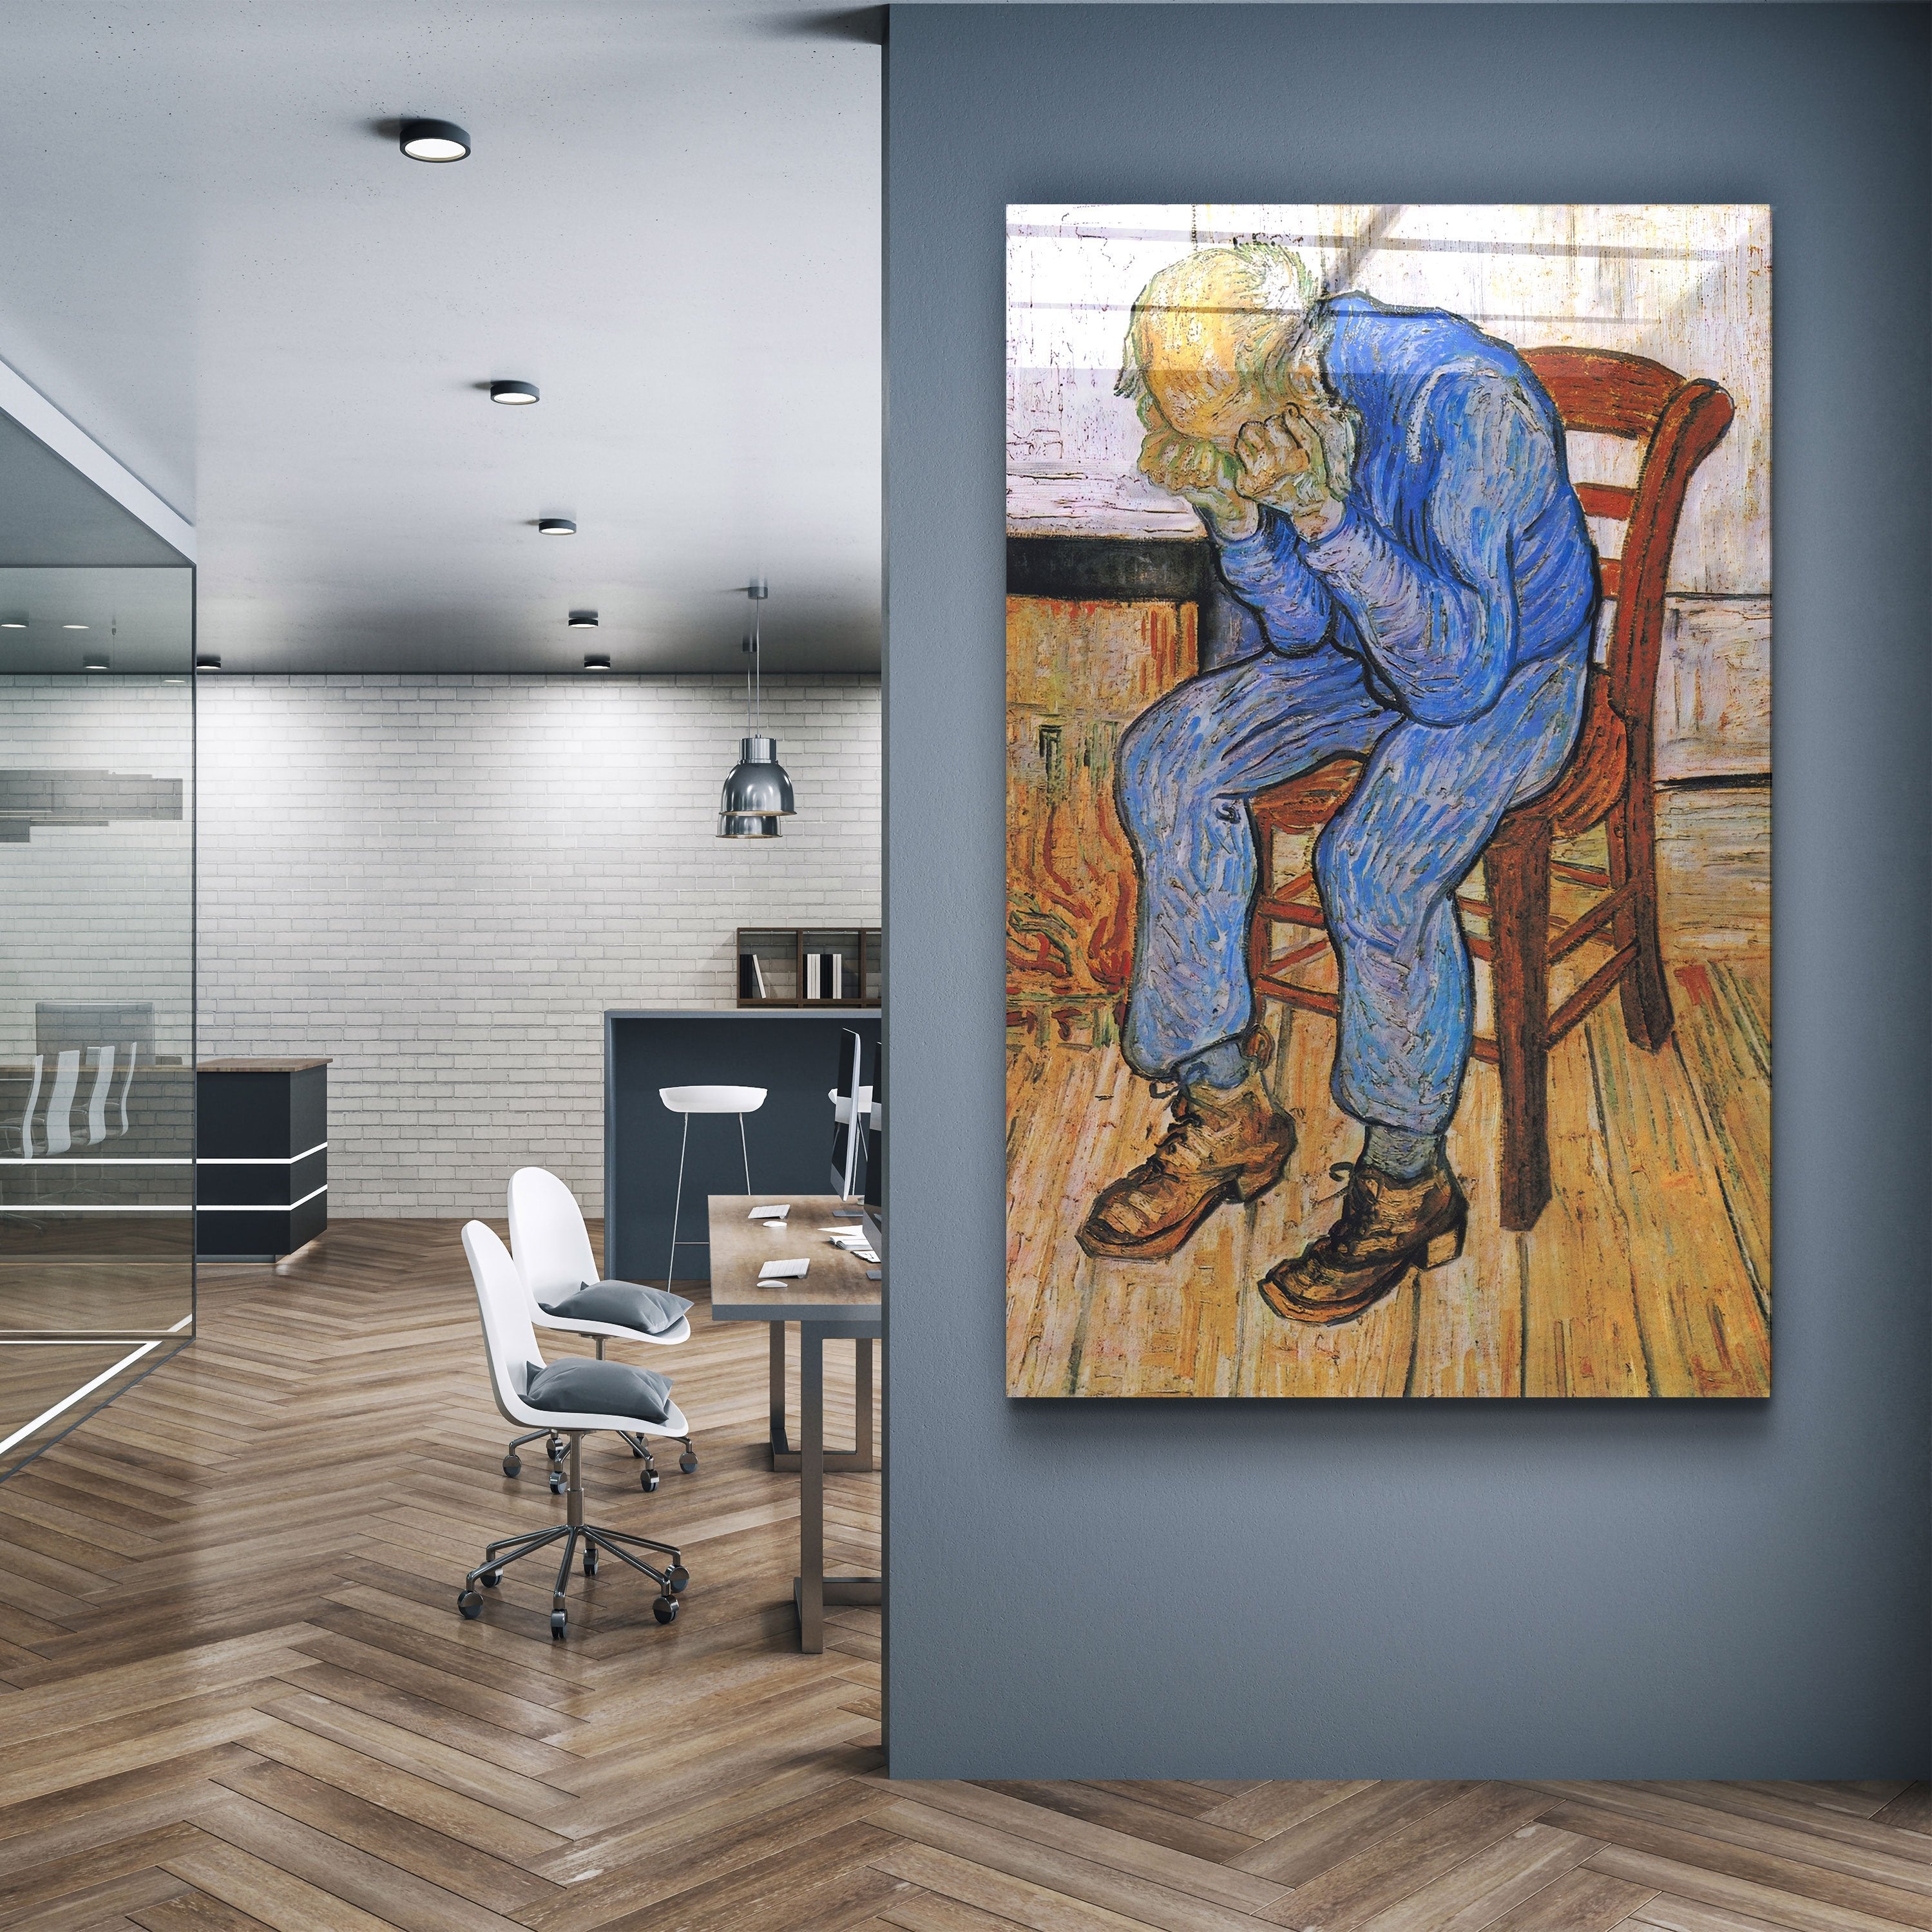 ・"Vincent van Gogh's At Eternity's Gate (1890)"・Glass Wall Art